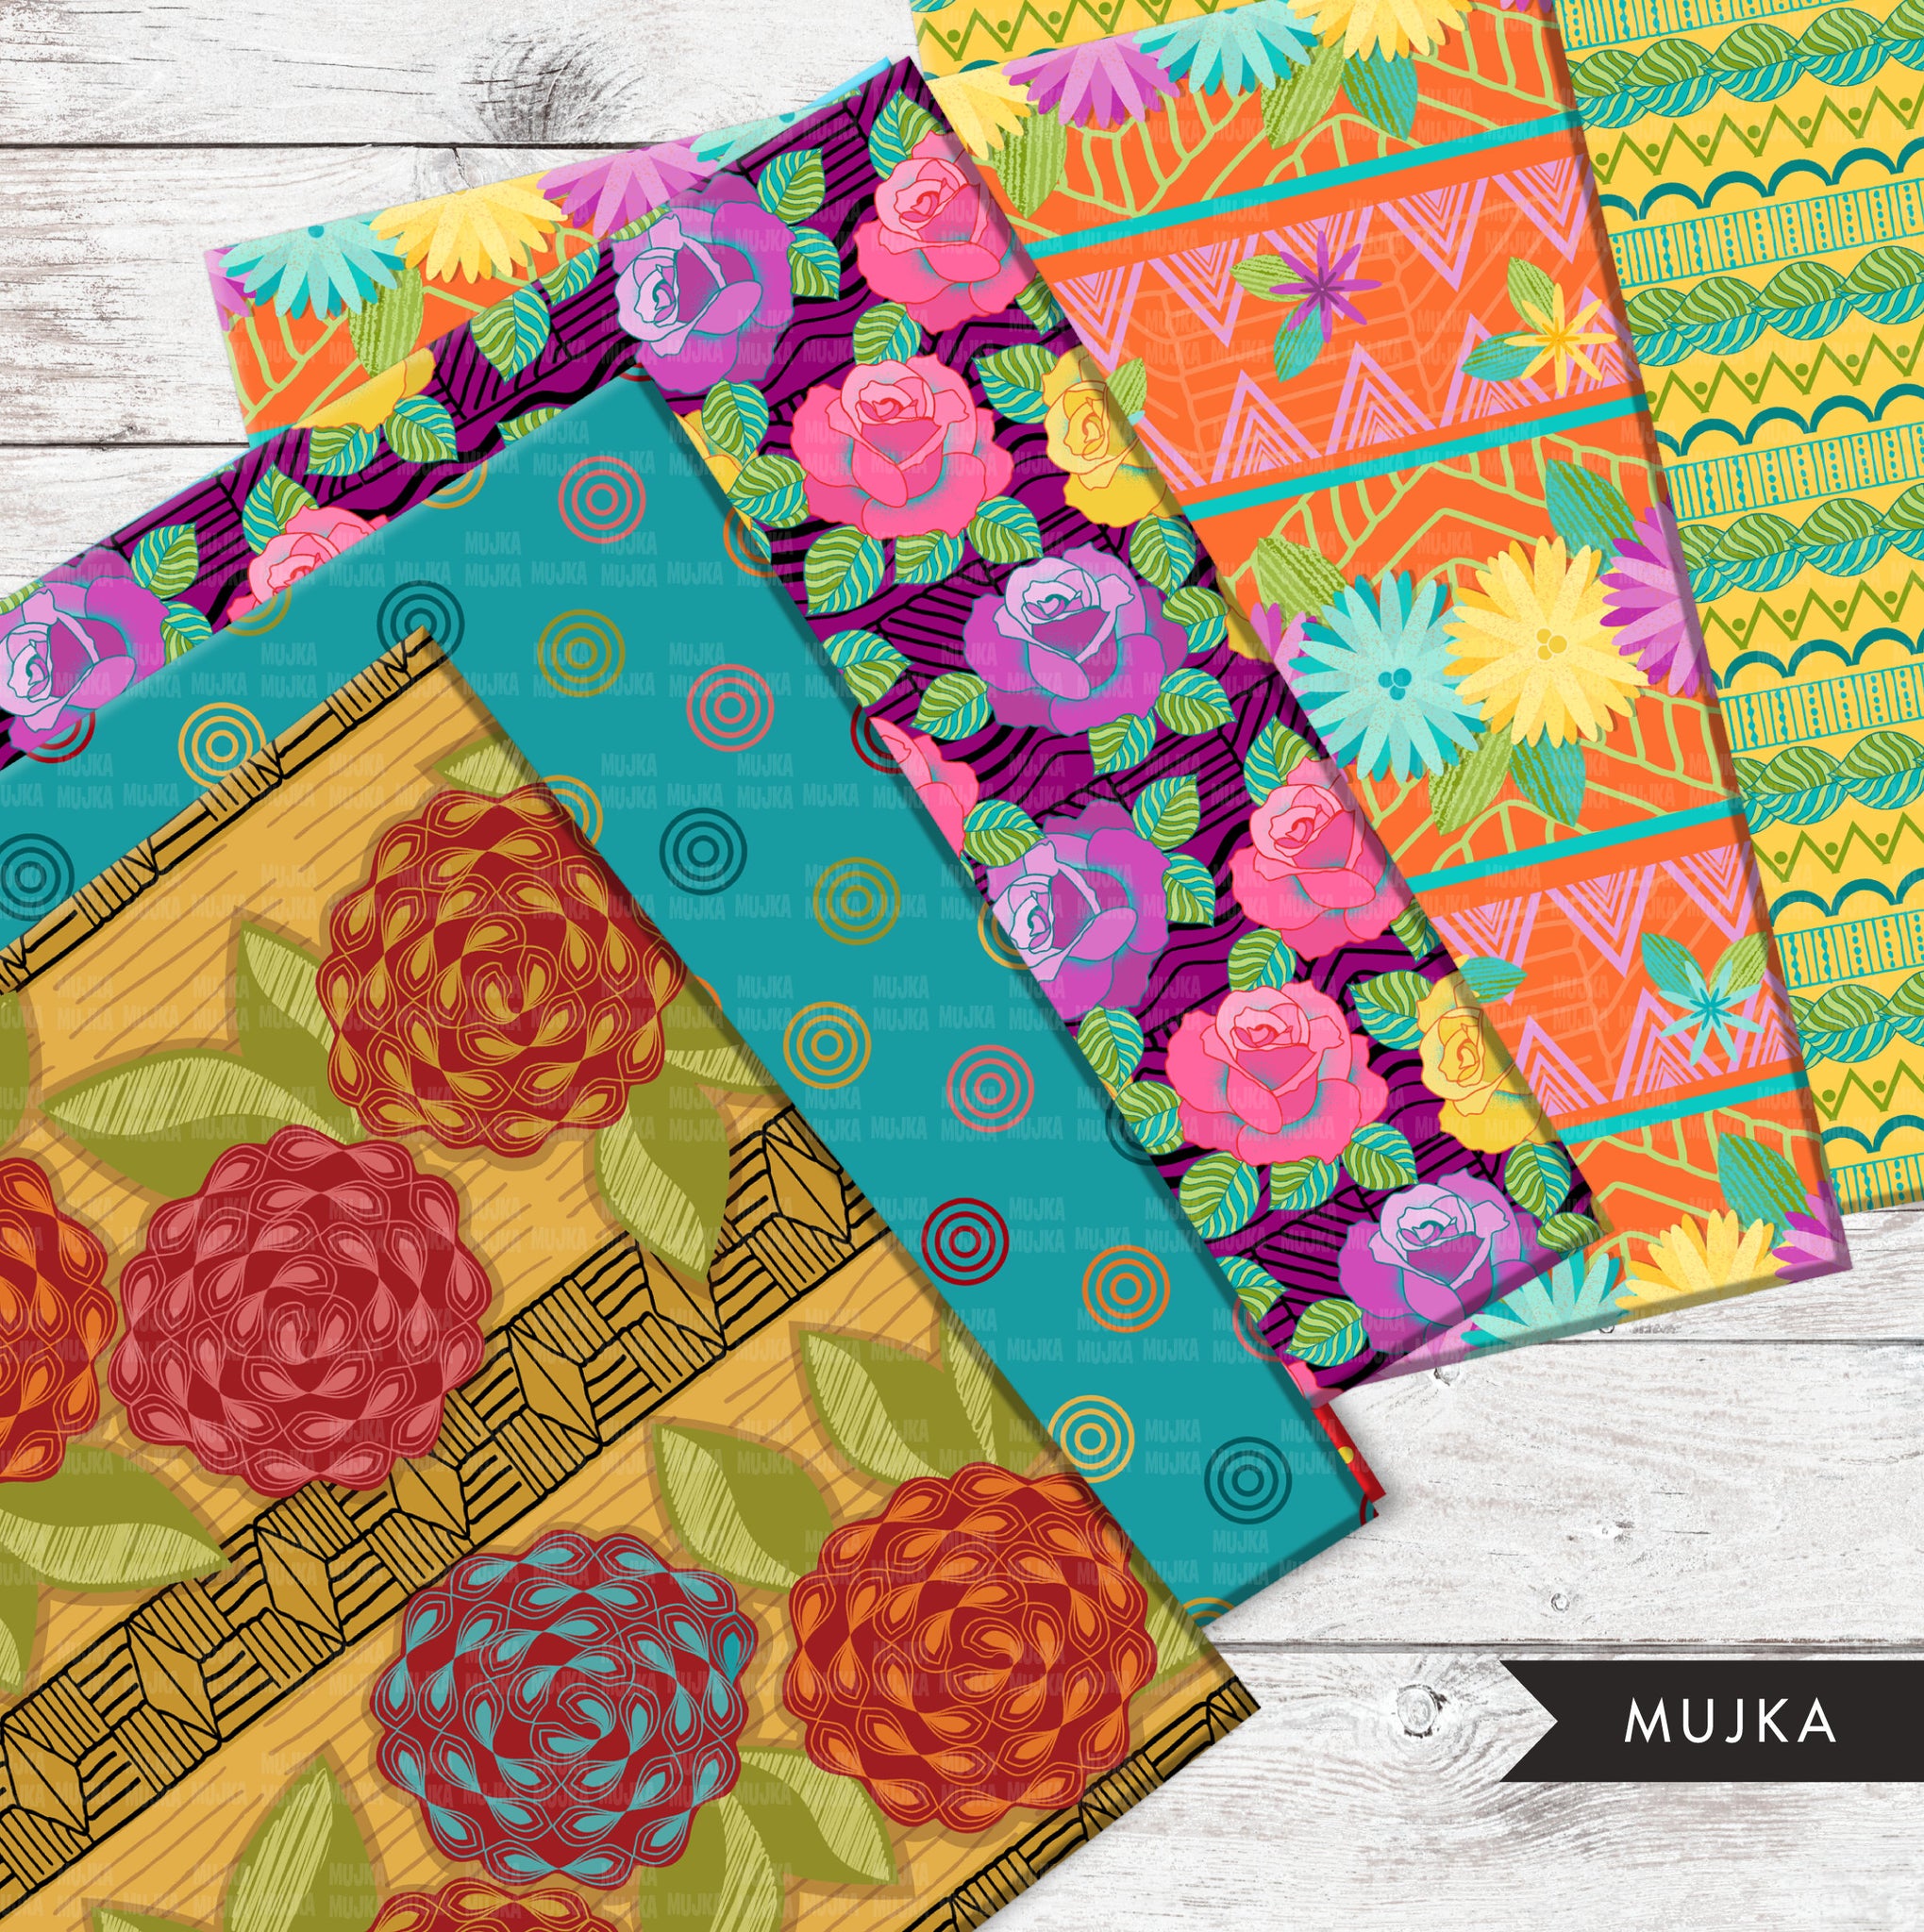 African digital papers, African patterns, Ankara Kente wax patterns, seamless digital patterns, floral texture, tribal backgrounds